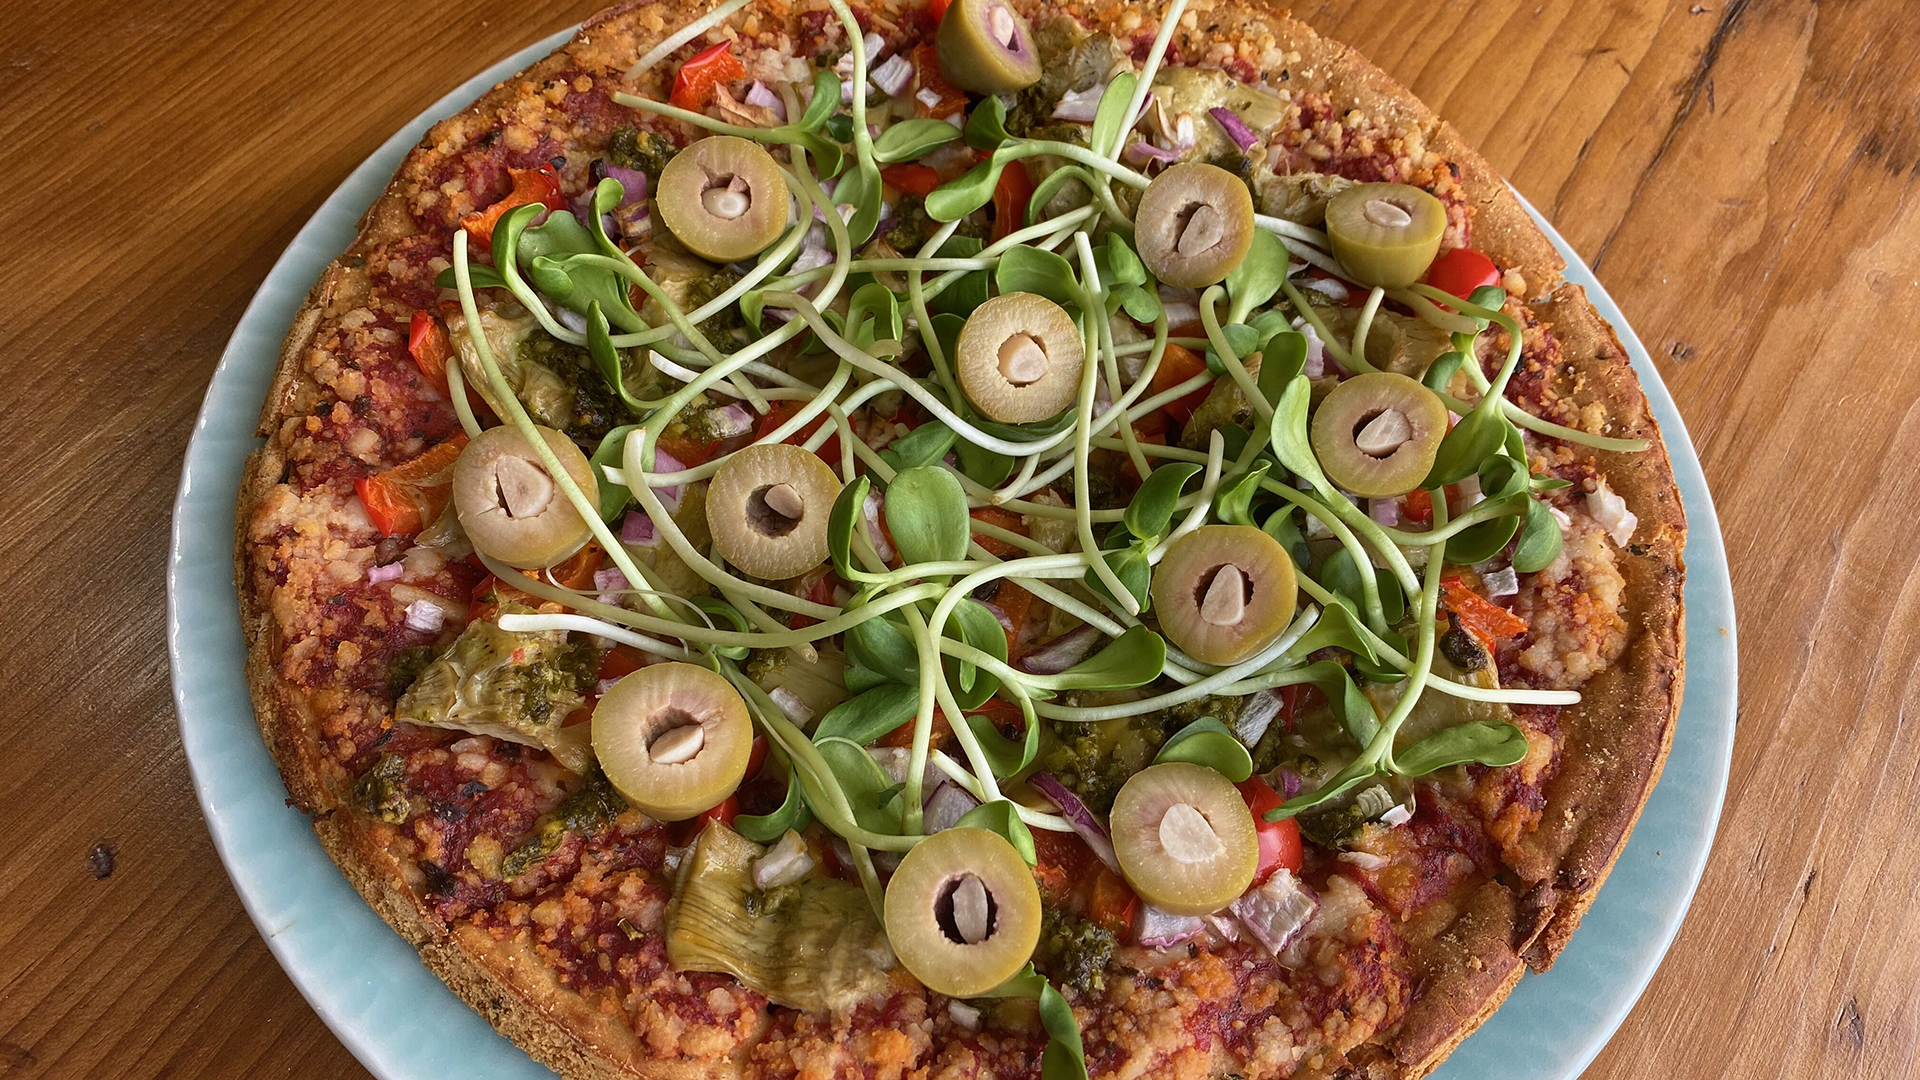 Low carb pizza